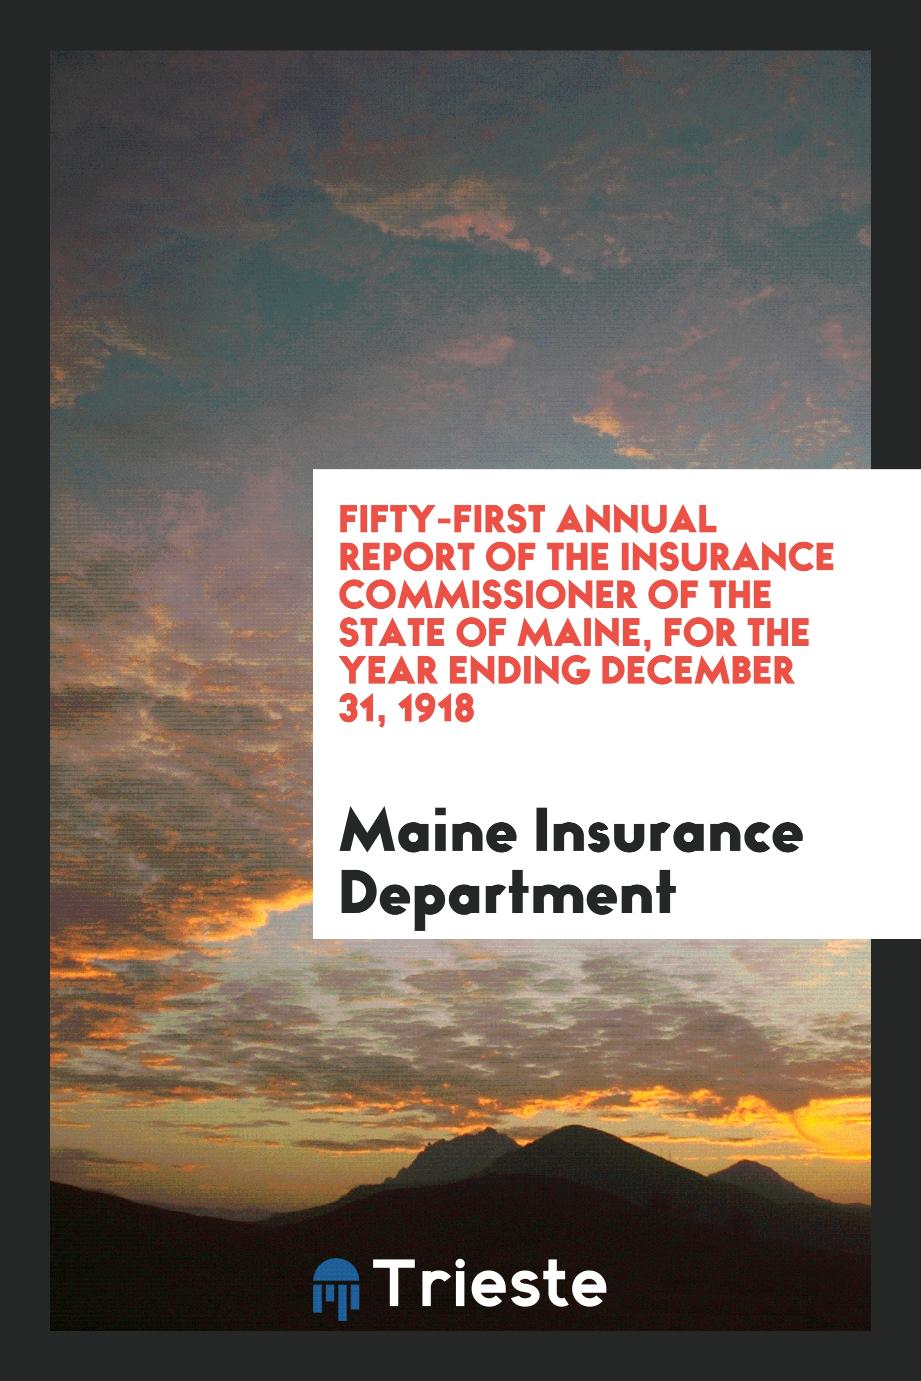 Fifty-first Annual Report of the Insurance Commissioner of the State of Maine, for the Year Ending December 31, 1918